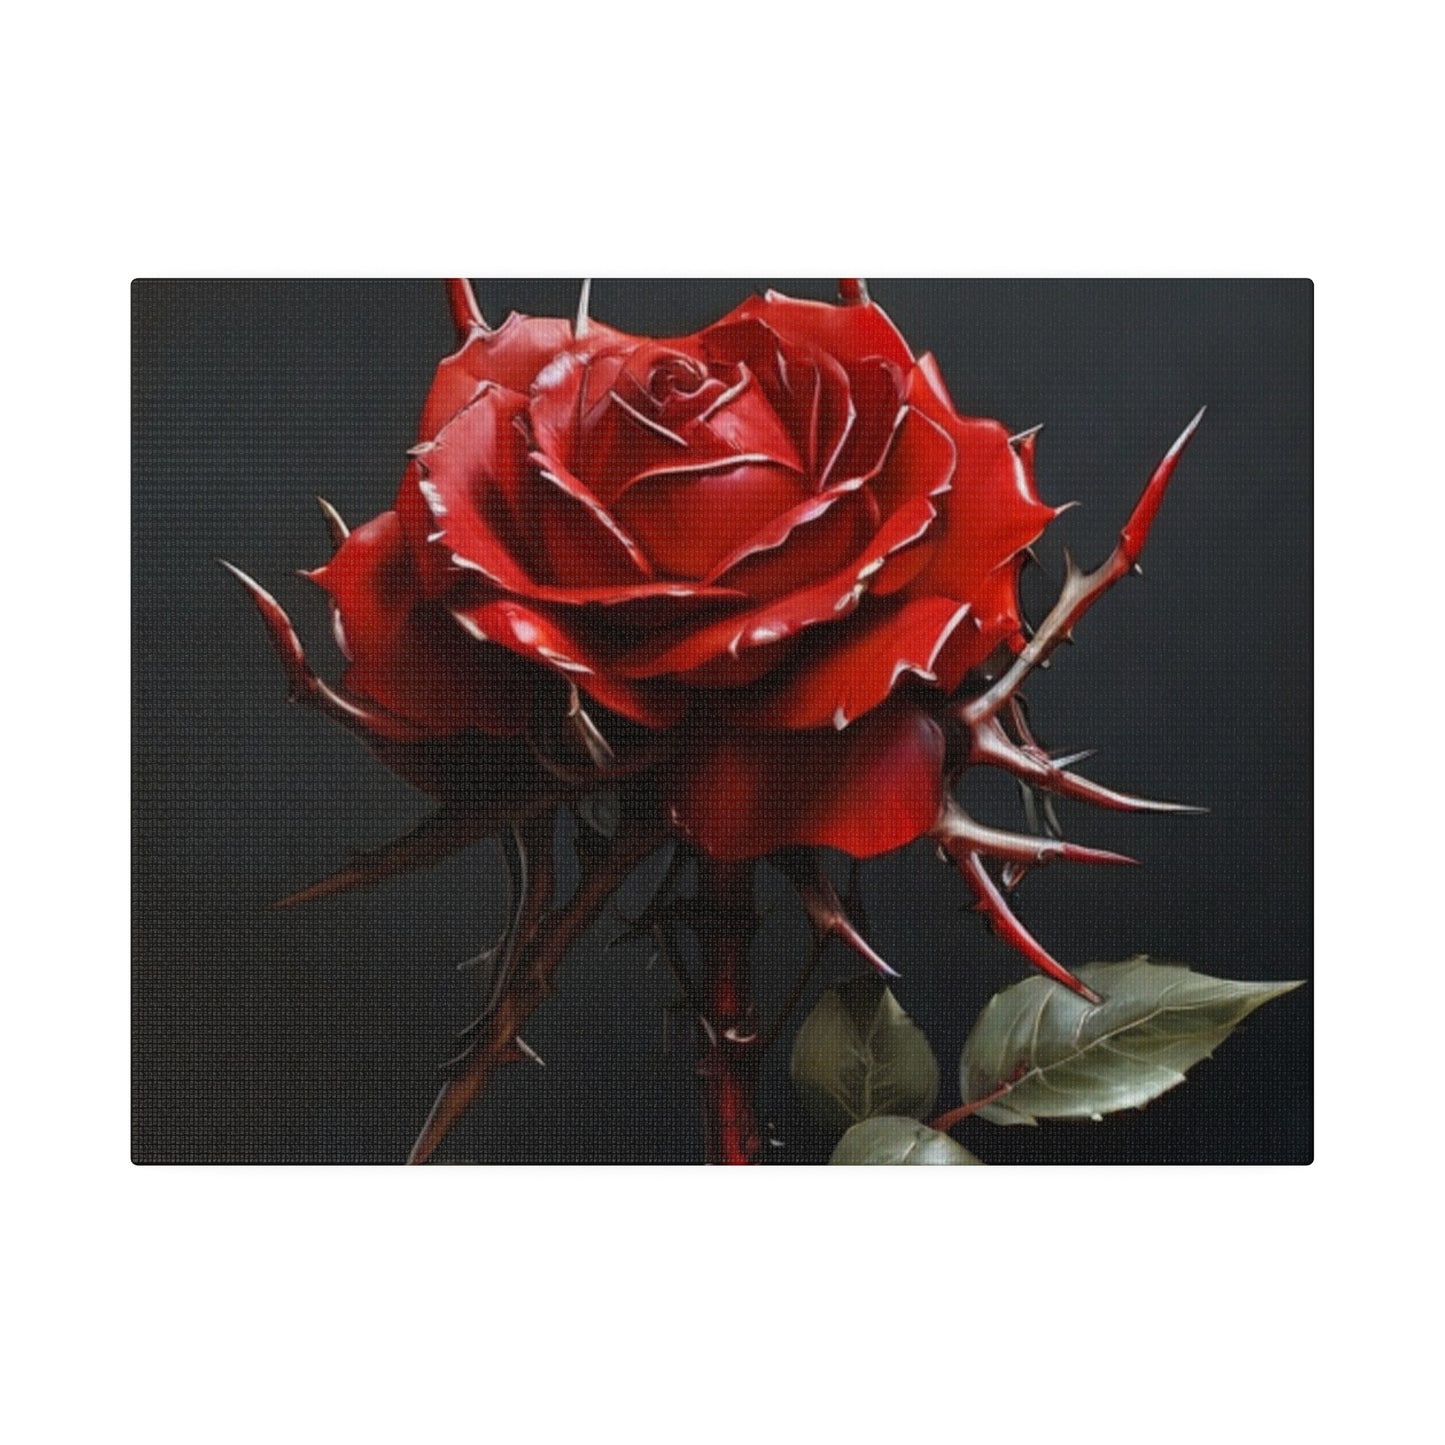 Thorny Red Rose - Matte Canvas, Stretched, 0.75"